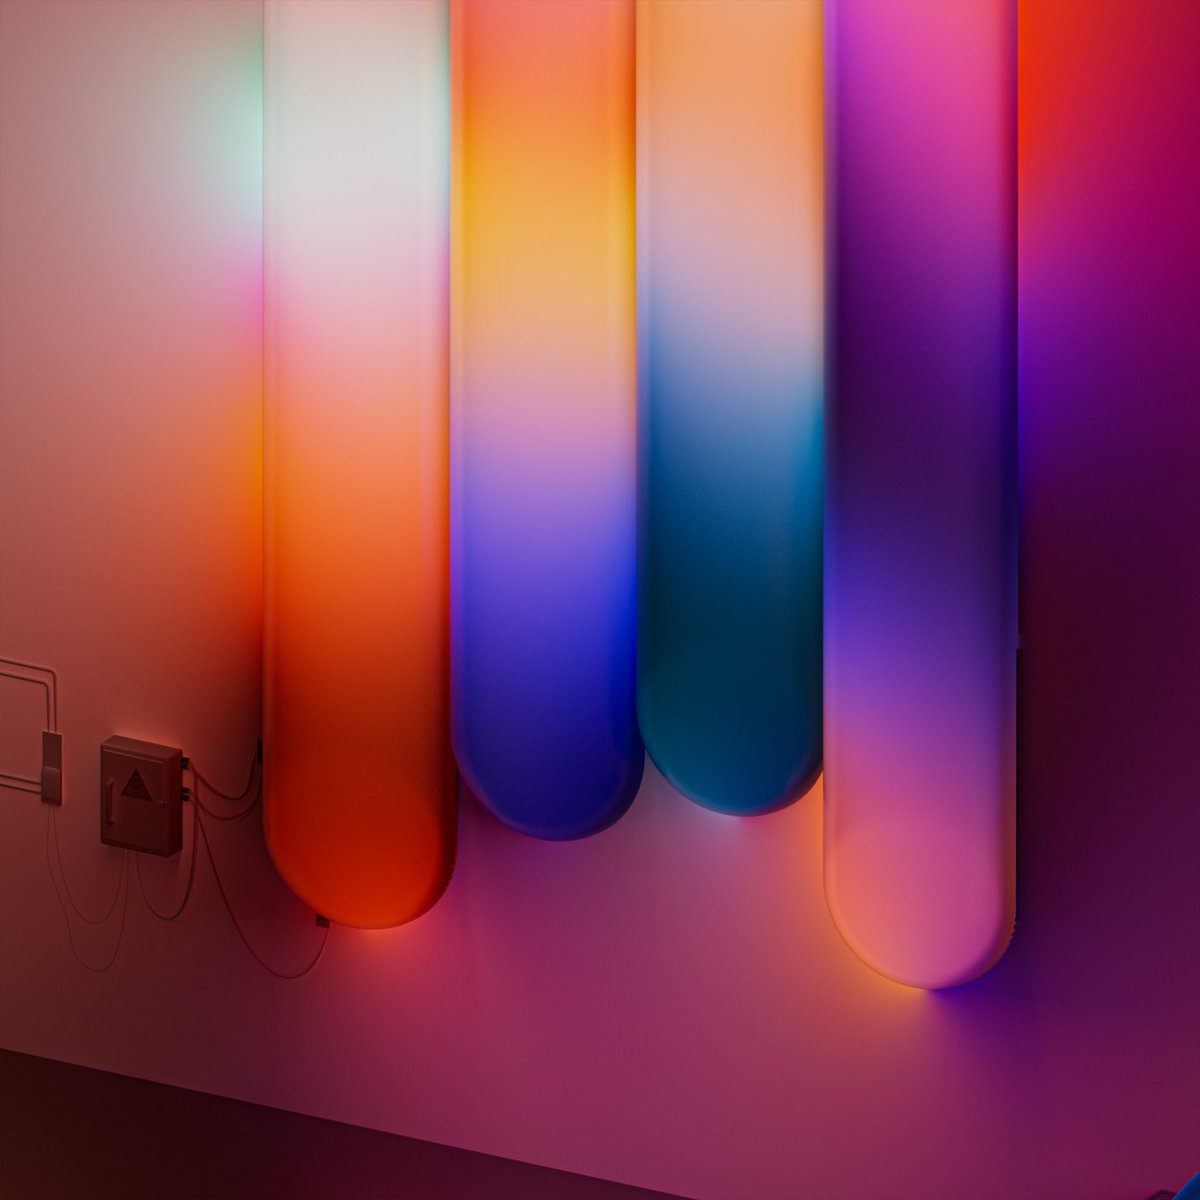 Neon wall lamp 
Will definitely make this into reality!

#lamp #lampdesign